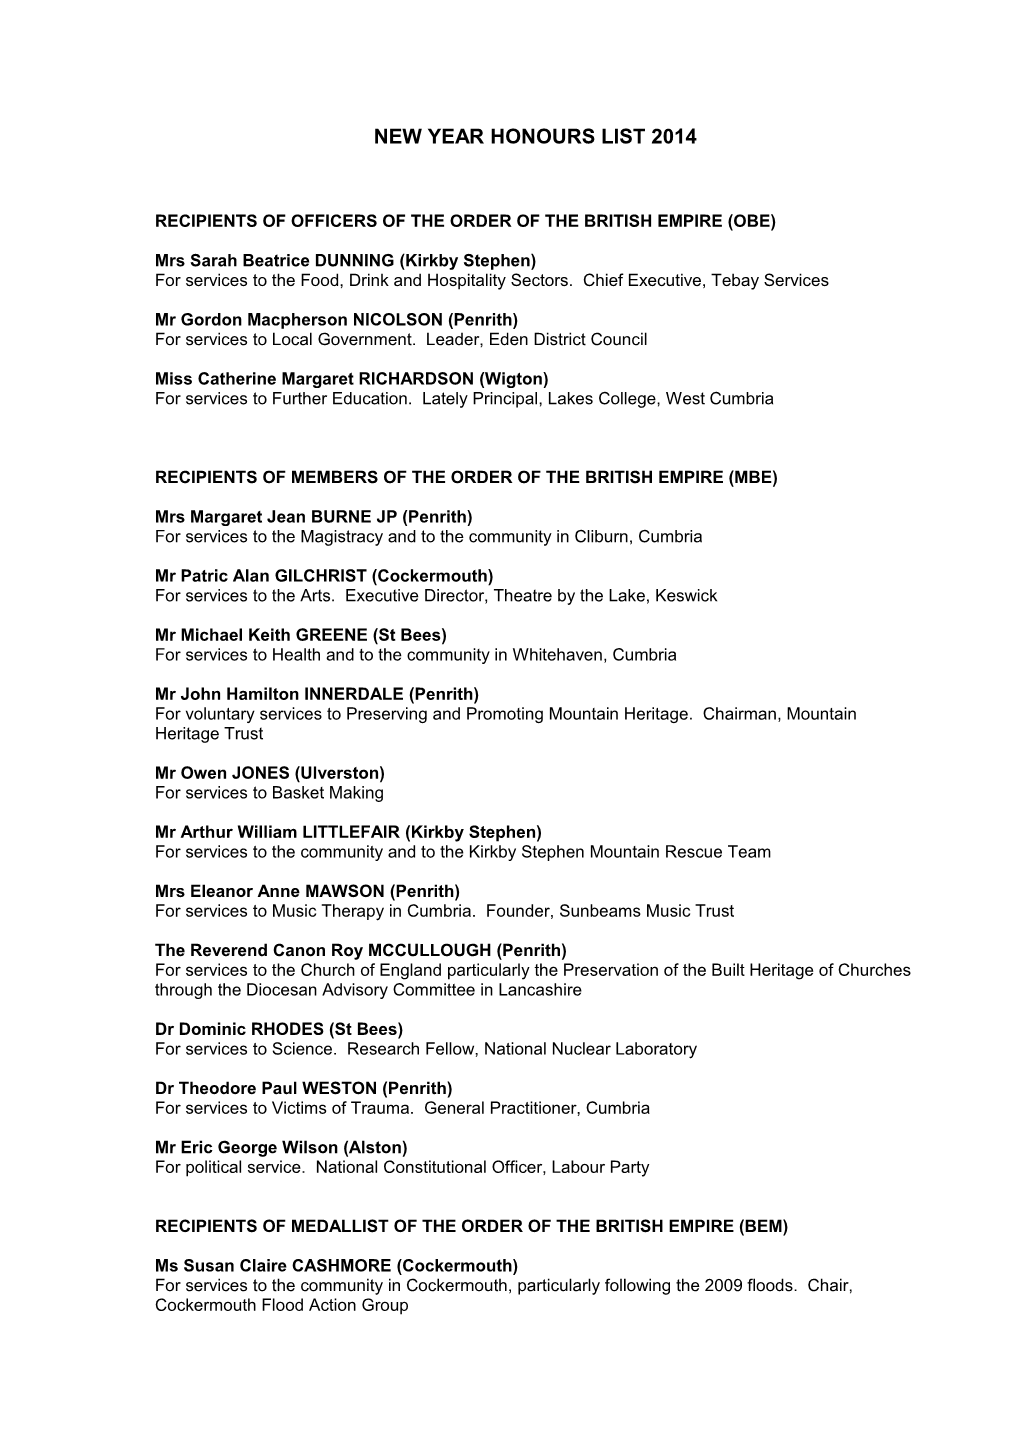 New Year Honours List 2012